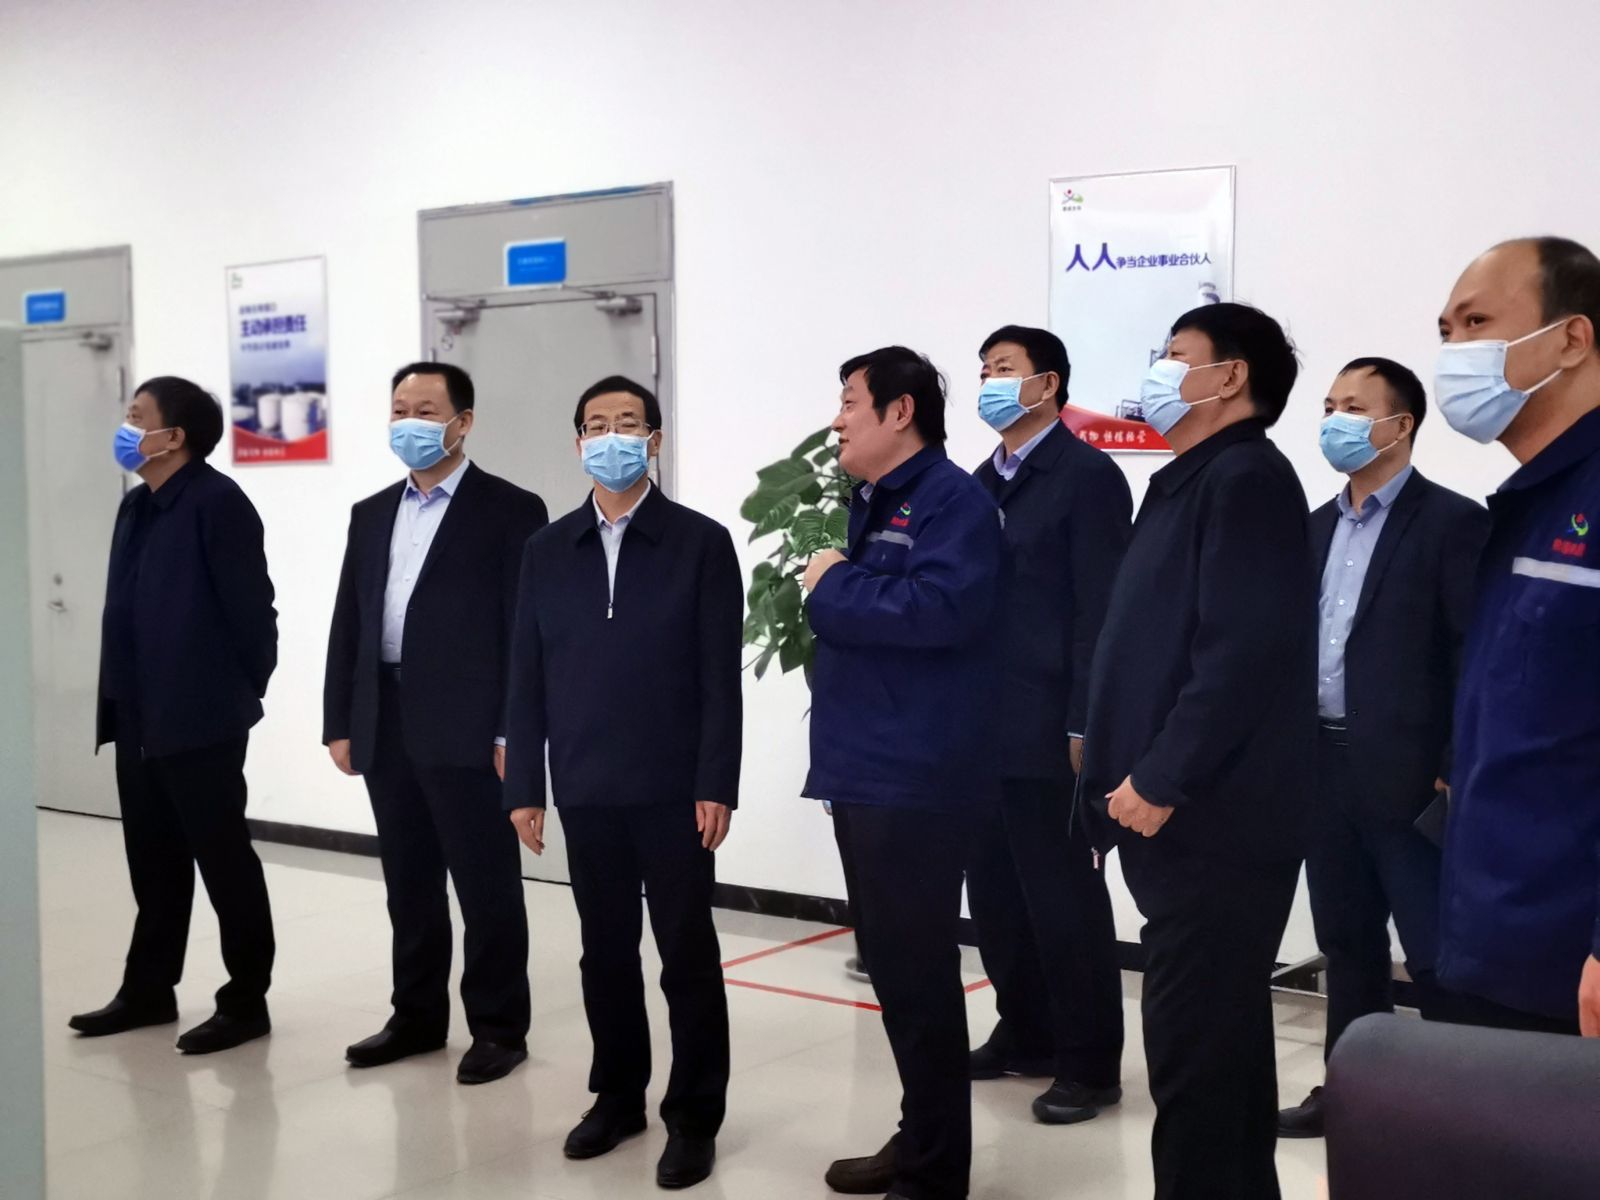 Mayor Wan Zhengfeng came to our company for investigation and guidance